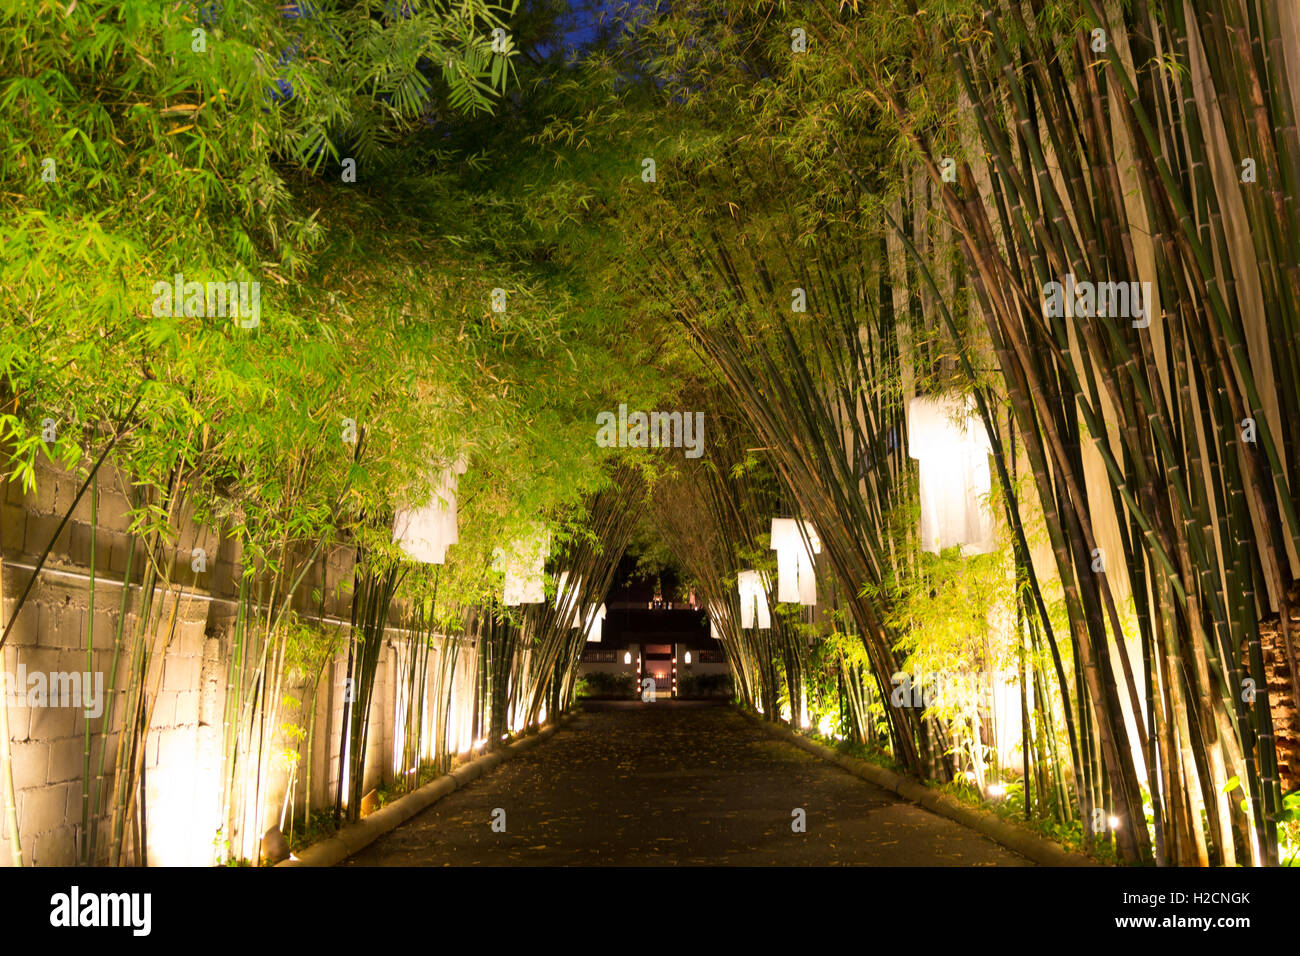 Bamboo tunnel along the road. Stock Photo